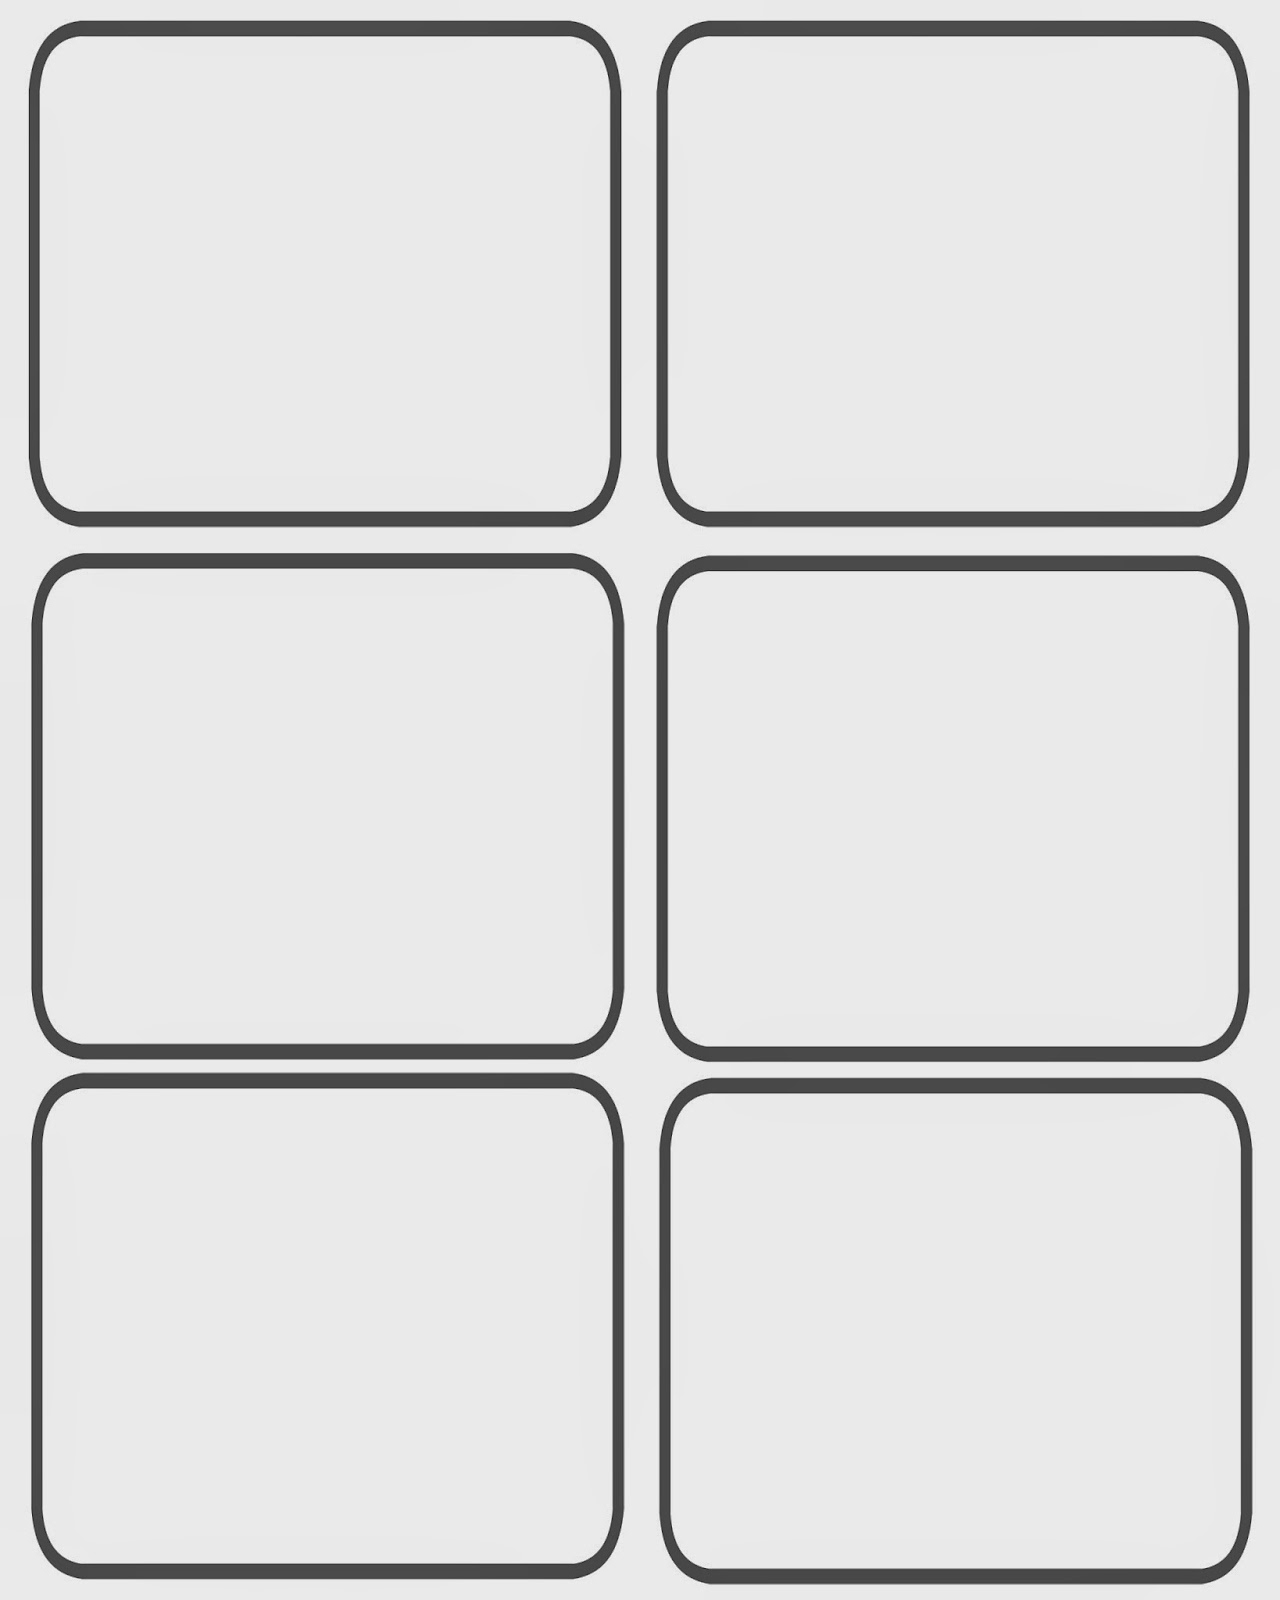 restlessrisa: Free Printable Valentine Game In Free Printable Playing Cards Template